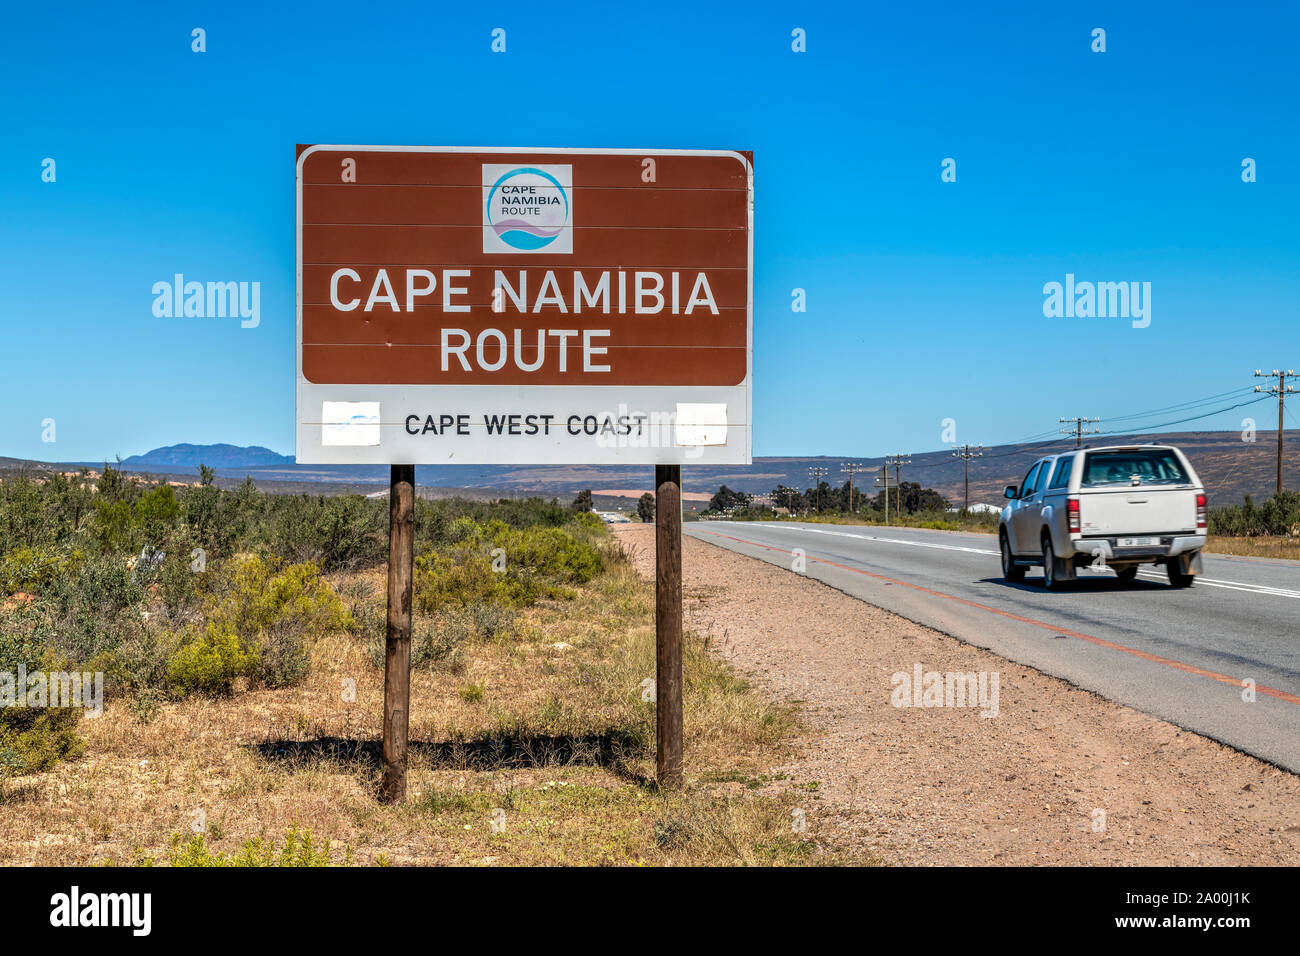 Cape Namibia route sign, Piketberg, Western Cape, South Africa Stock Photo